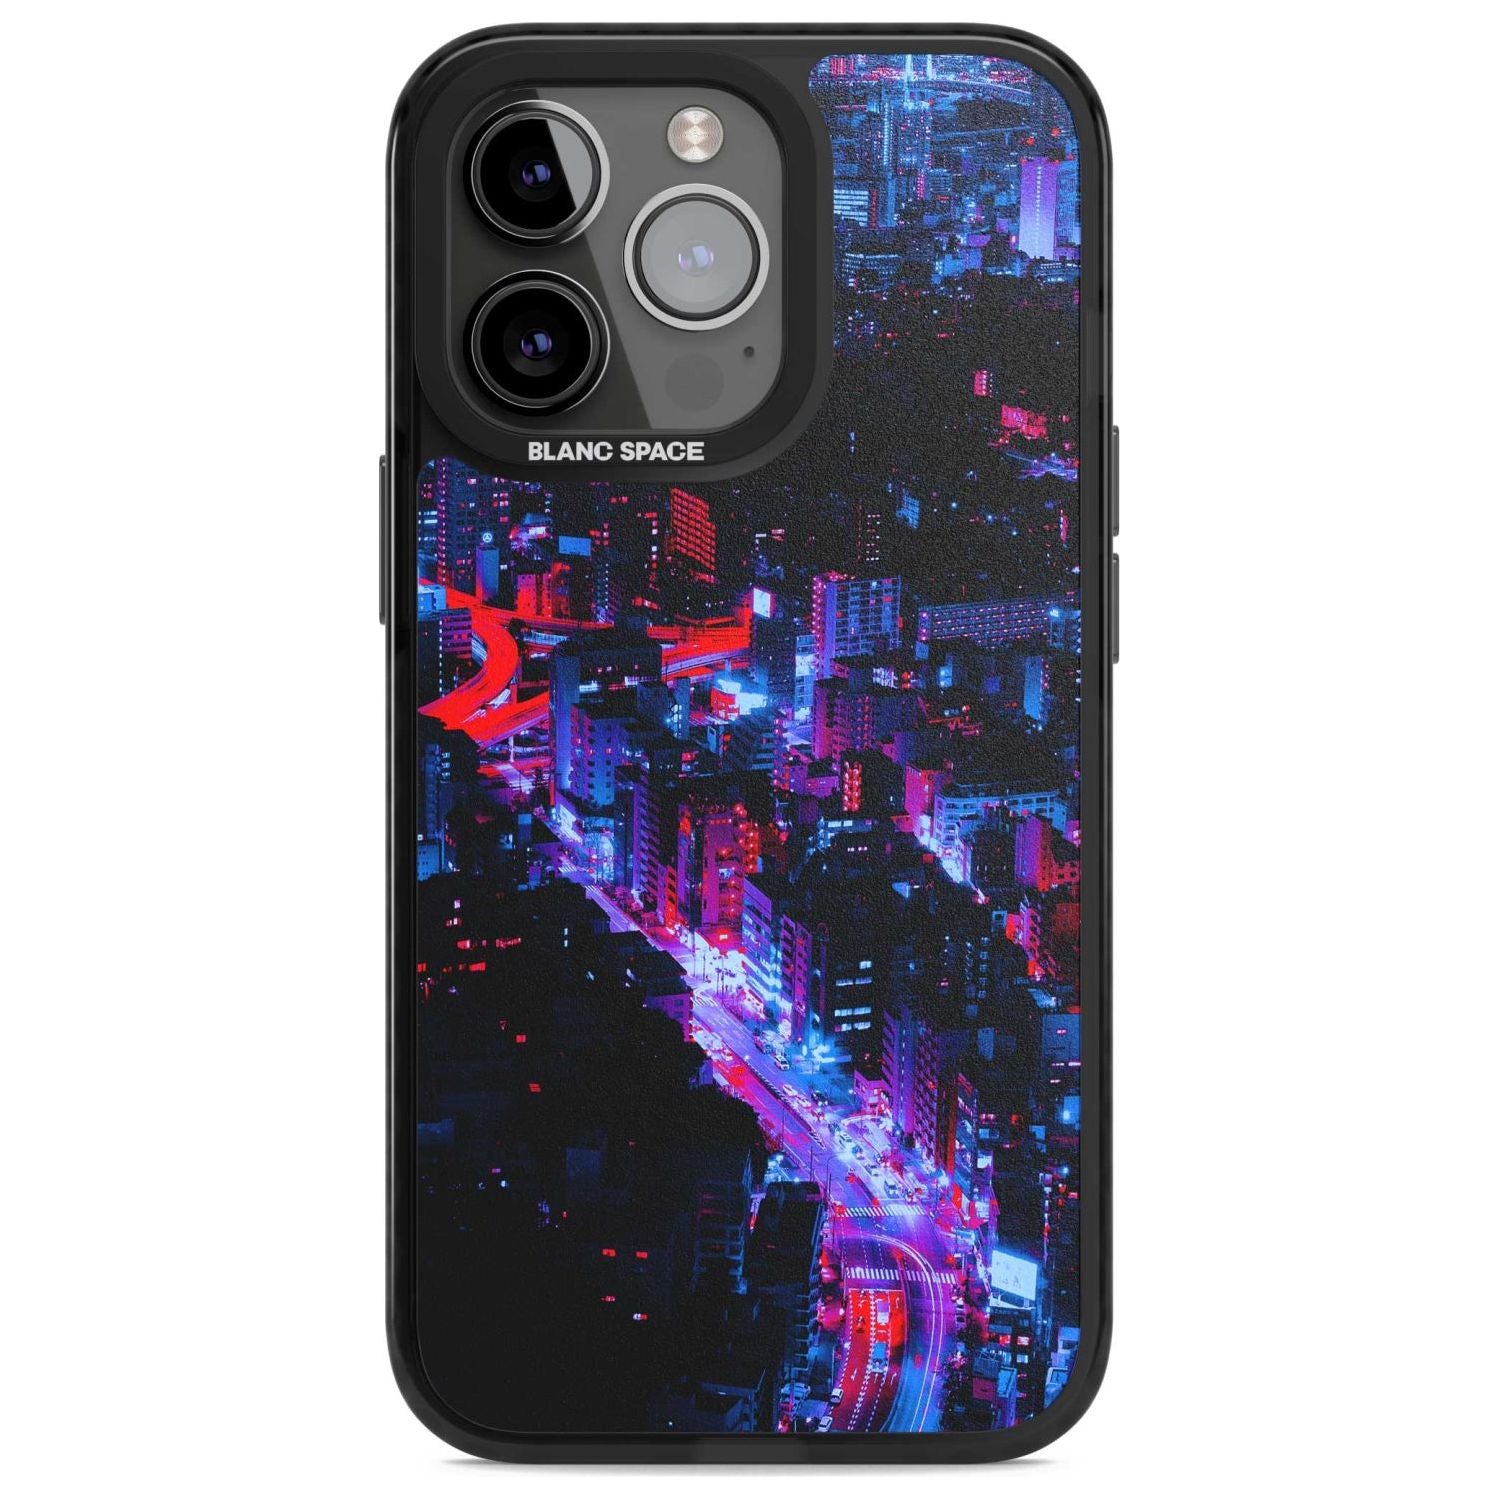 Arial City View - Neon Cities Photographs Phone Case iPhone 15 Pro Max / Magsafe Black Impact Case,iPhone 15 Pro / Magsafe Black Impact Case,iPhone 14 Pro Max / Magsafe Black Impact Case,iPhone 14 Pro / Magsafe Black Impact Case,iPhone 13 Pro / Magsafe Black Impact Case Blanc Space